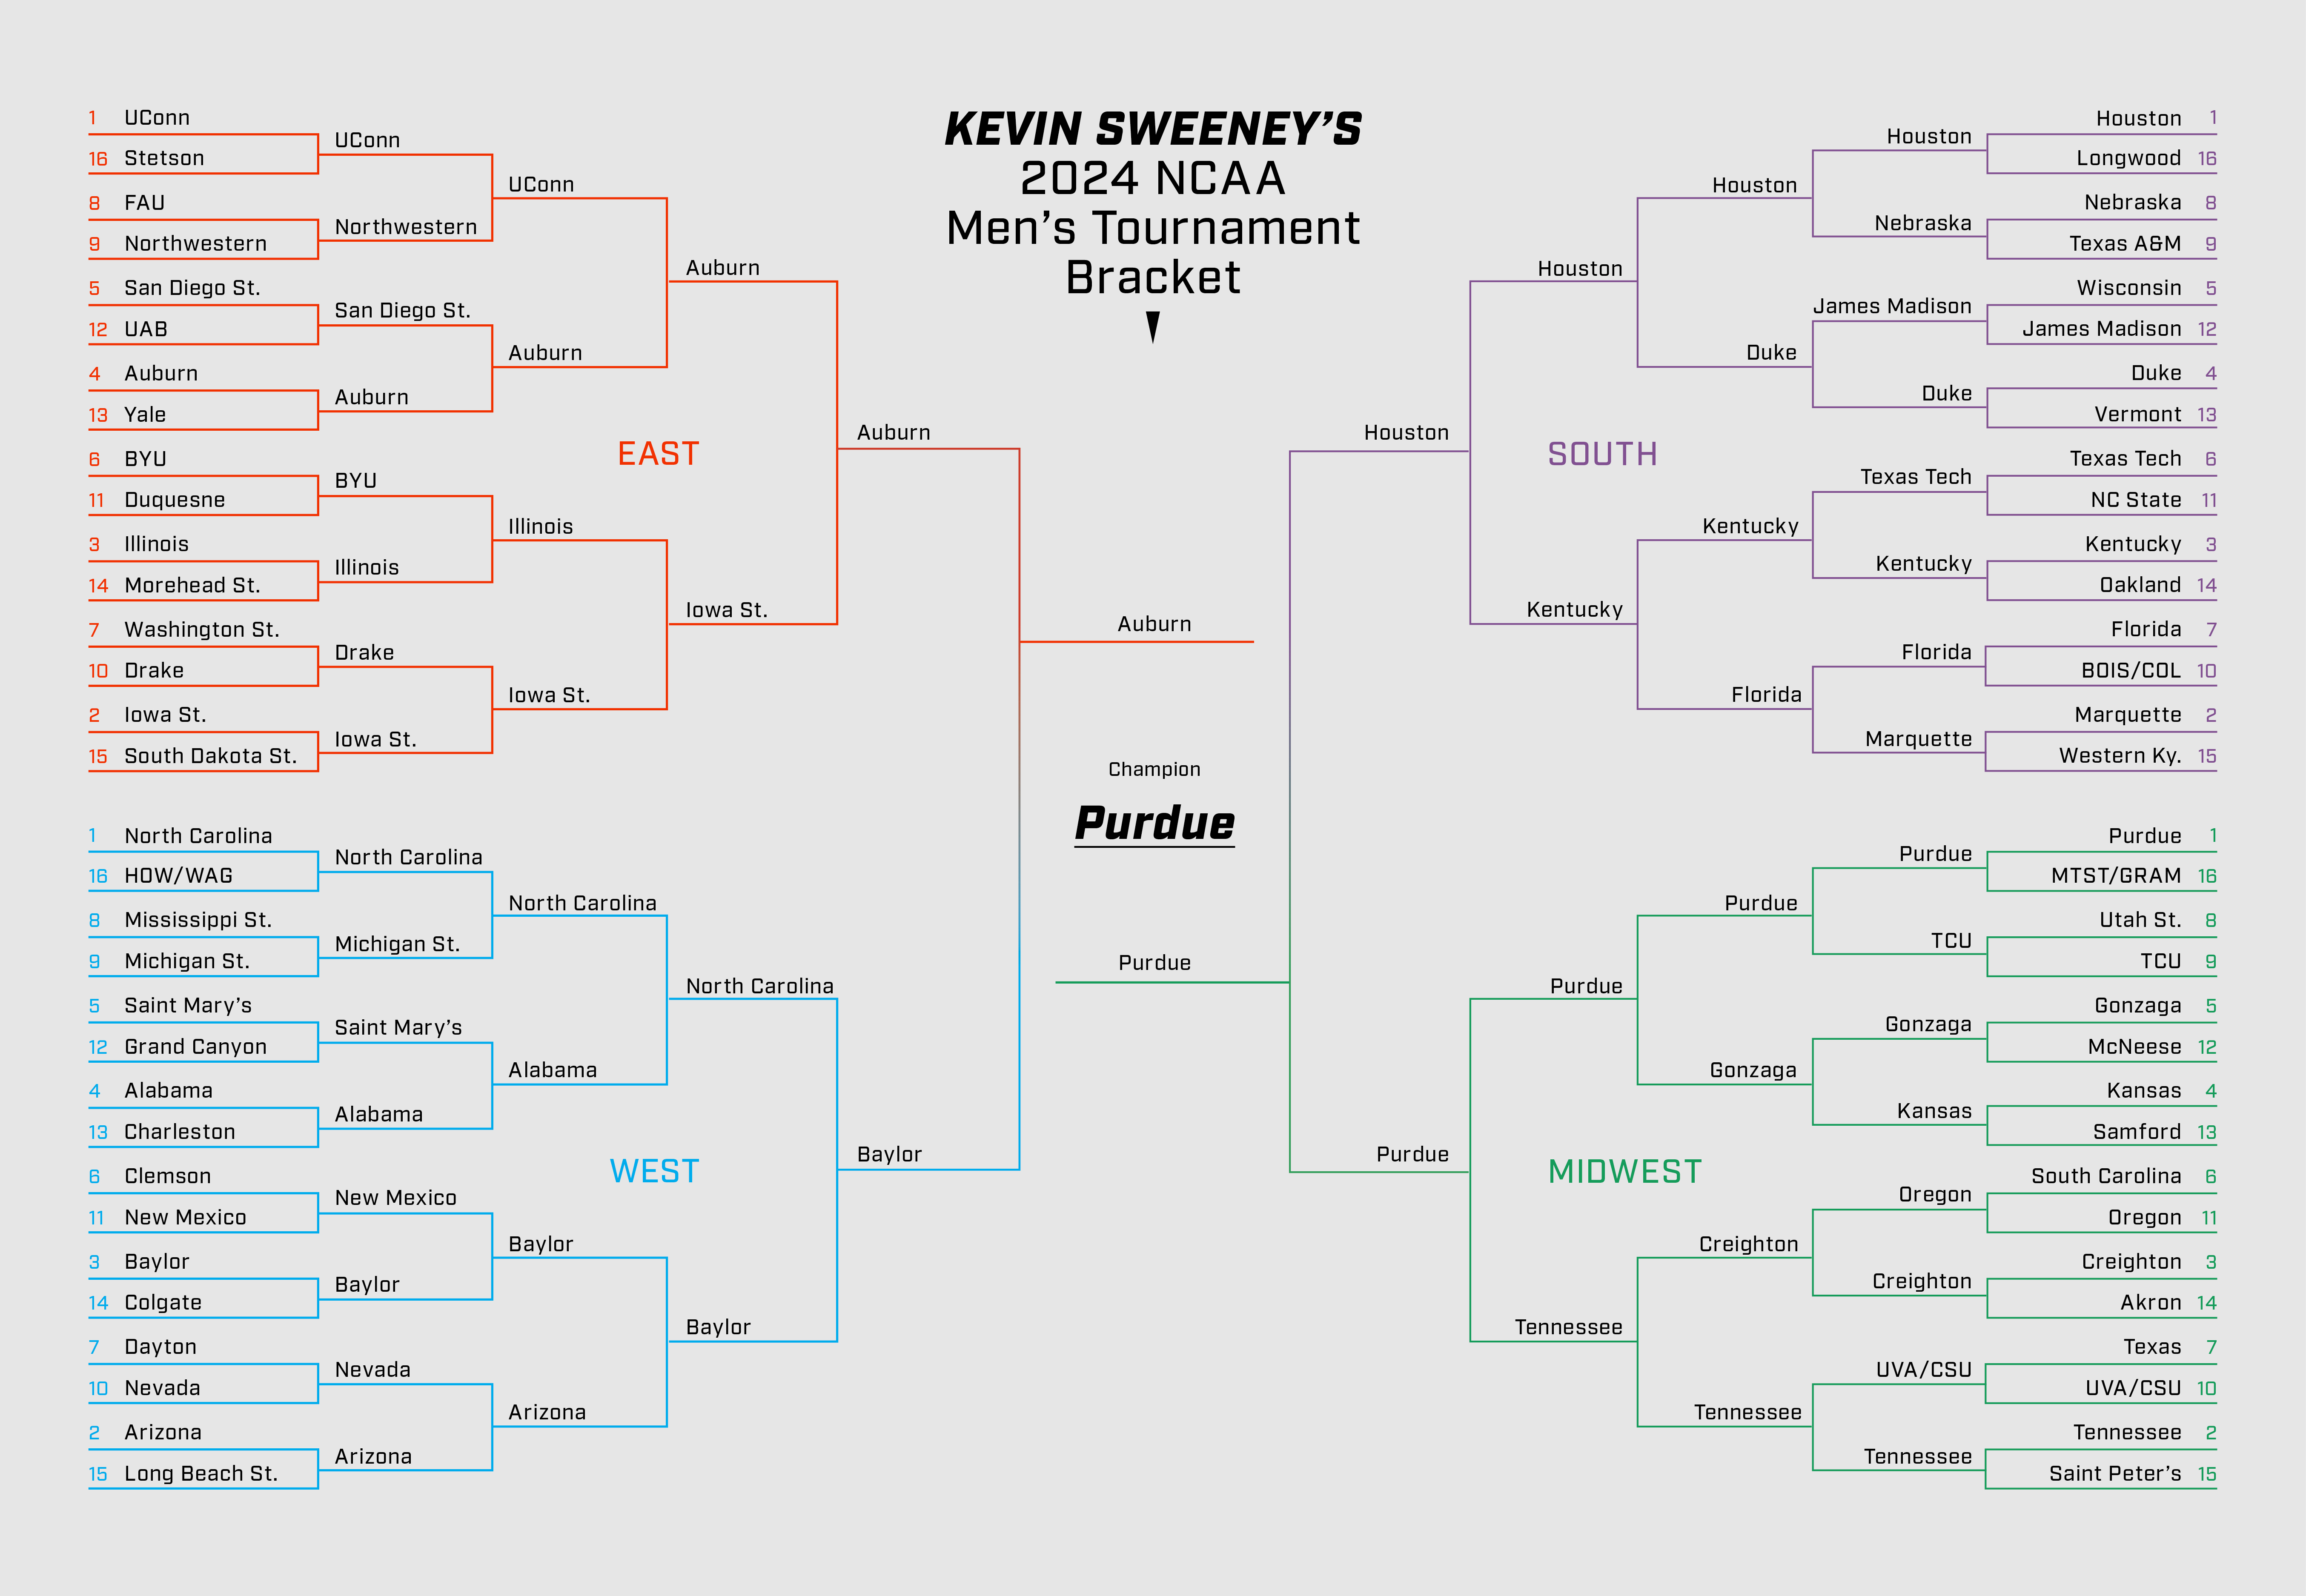 Click here for a full-sized version of Sweeney’s picks.